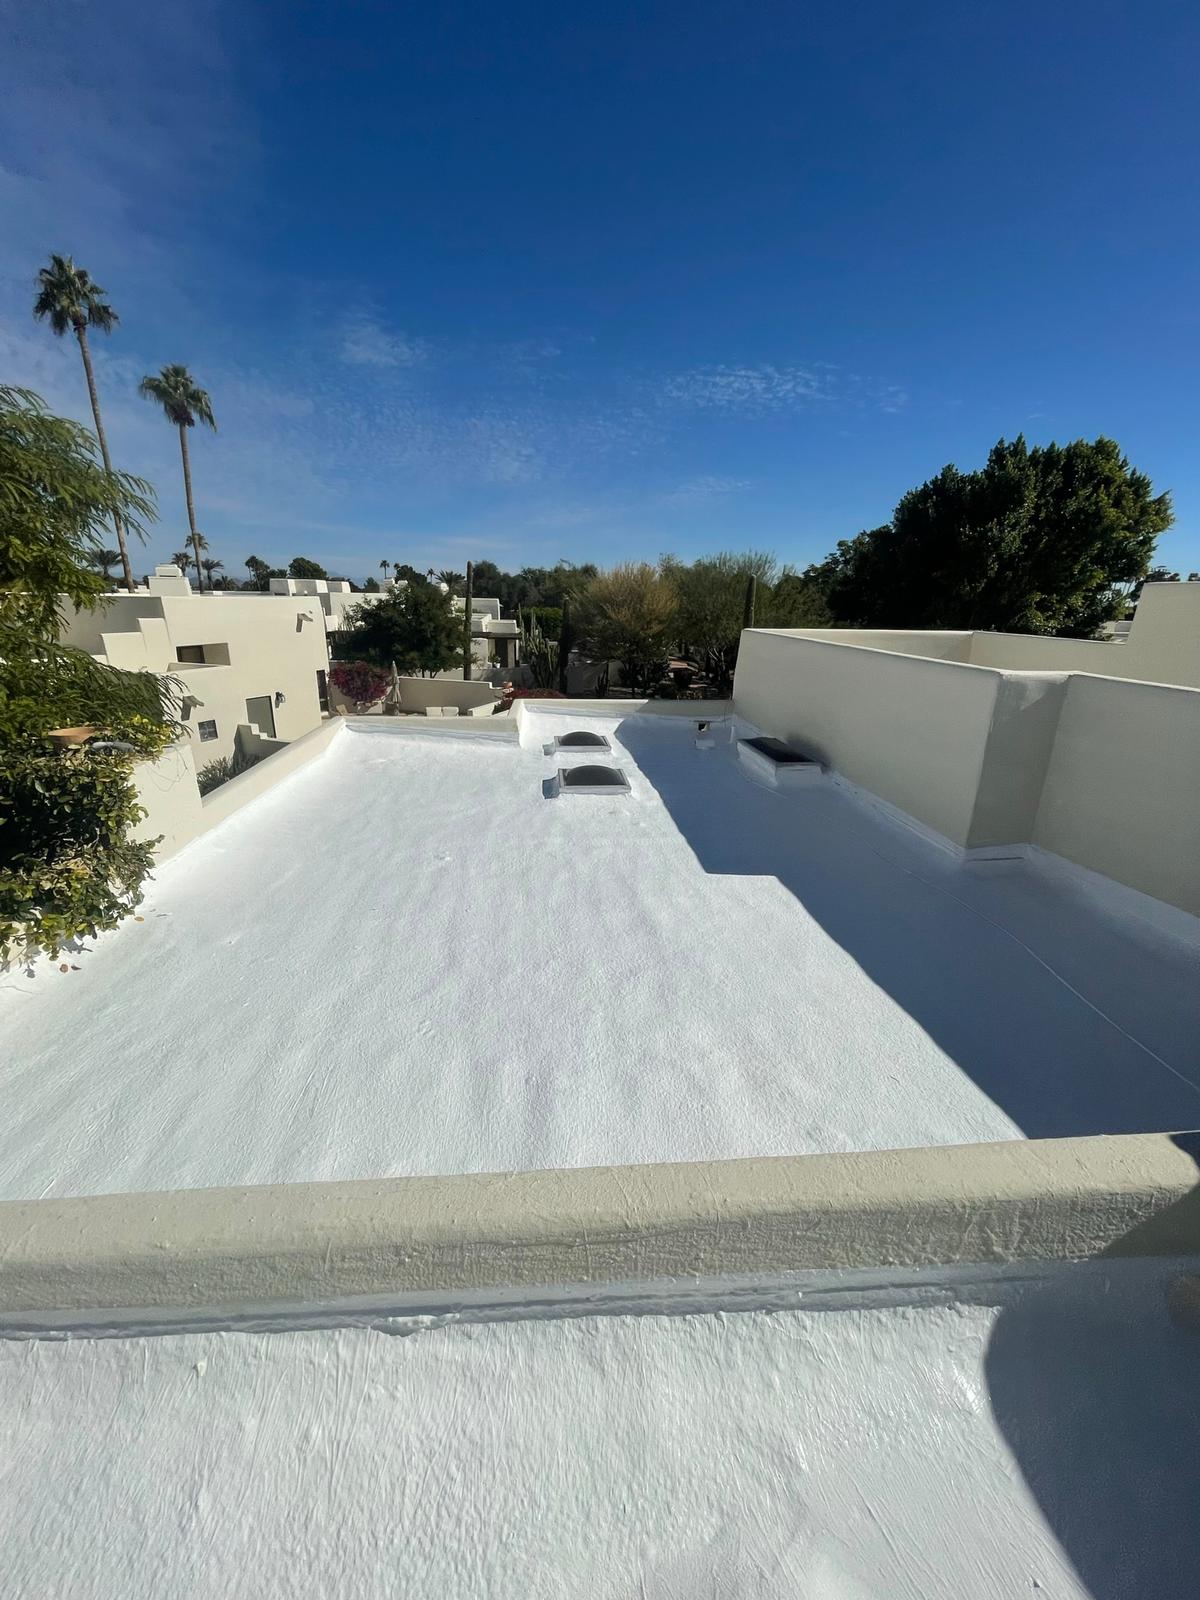 Freshly applied white spray foam on a Gilbert home's rooftop, offering a stark contrast against the blue sky and palm trees.